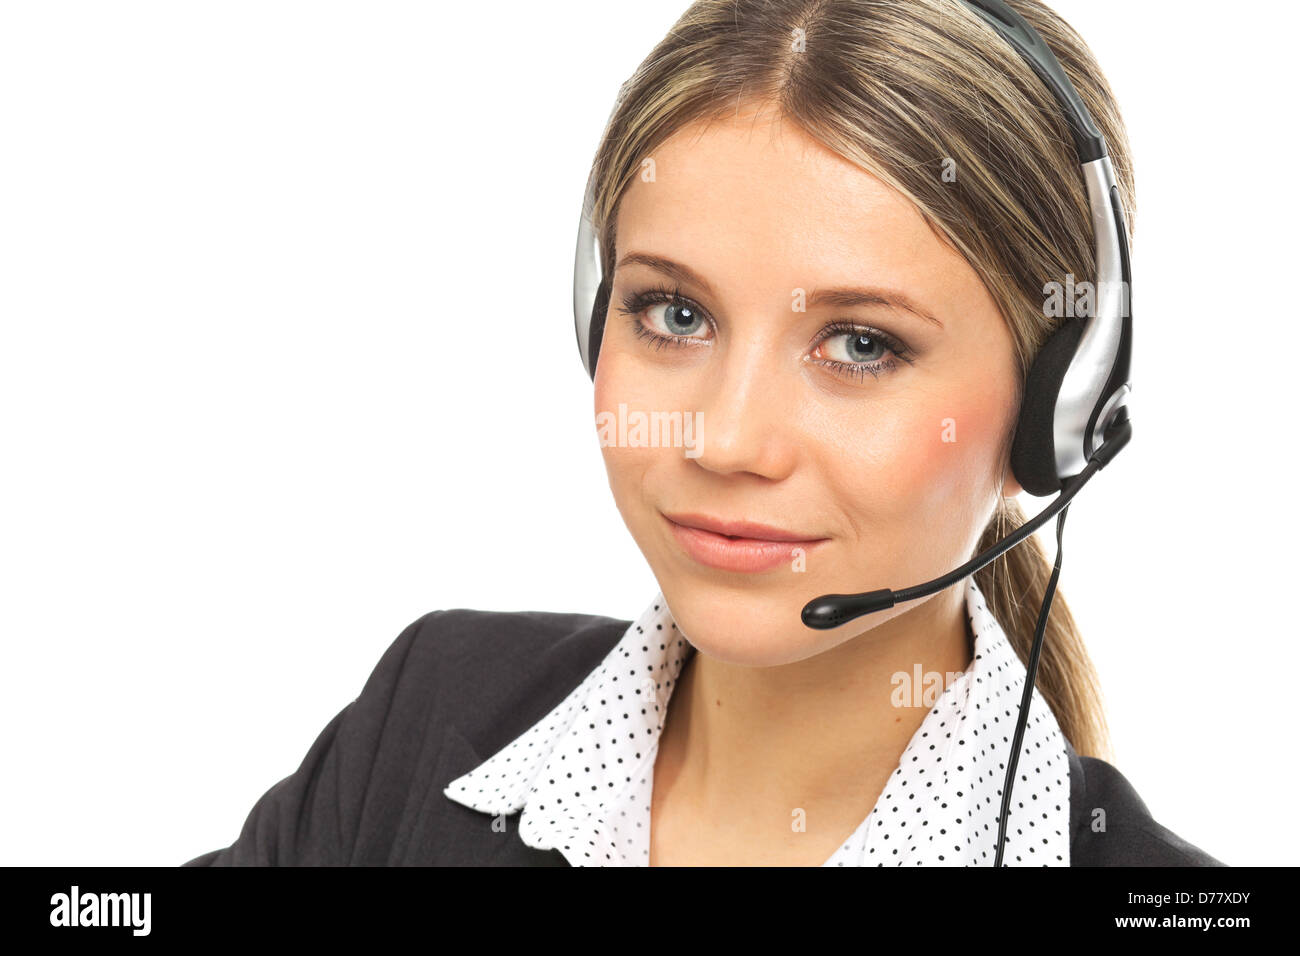 Close up portrait of a blond girl with headphones, illustrating support phone operator, on white Stock Photo